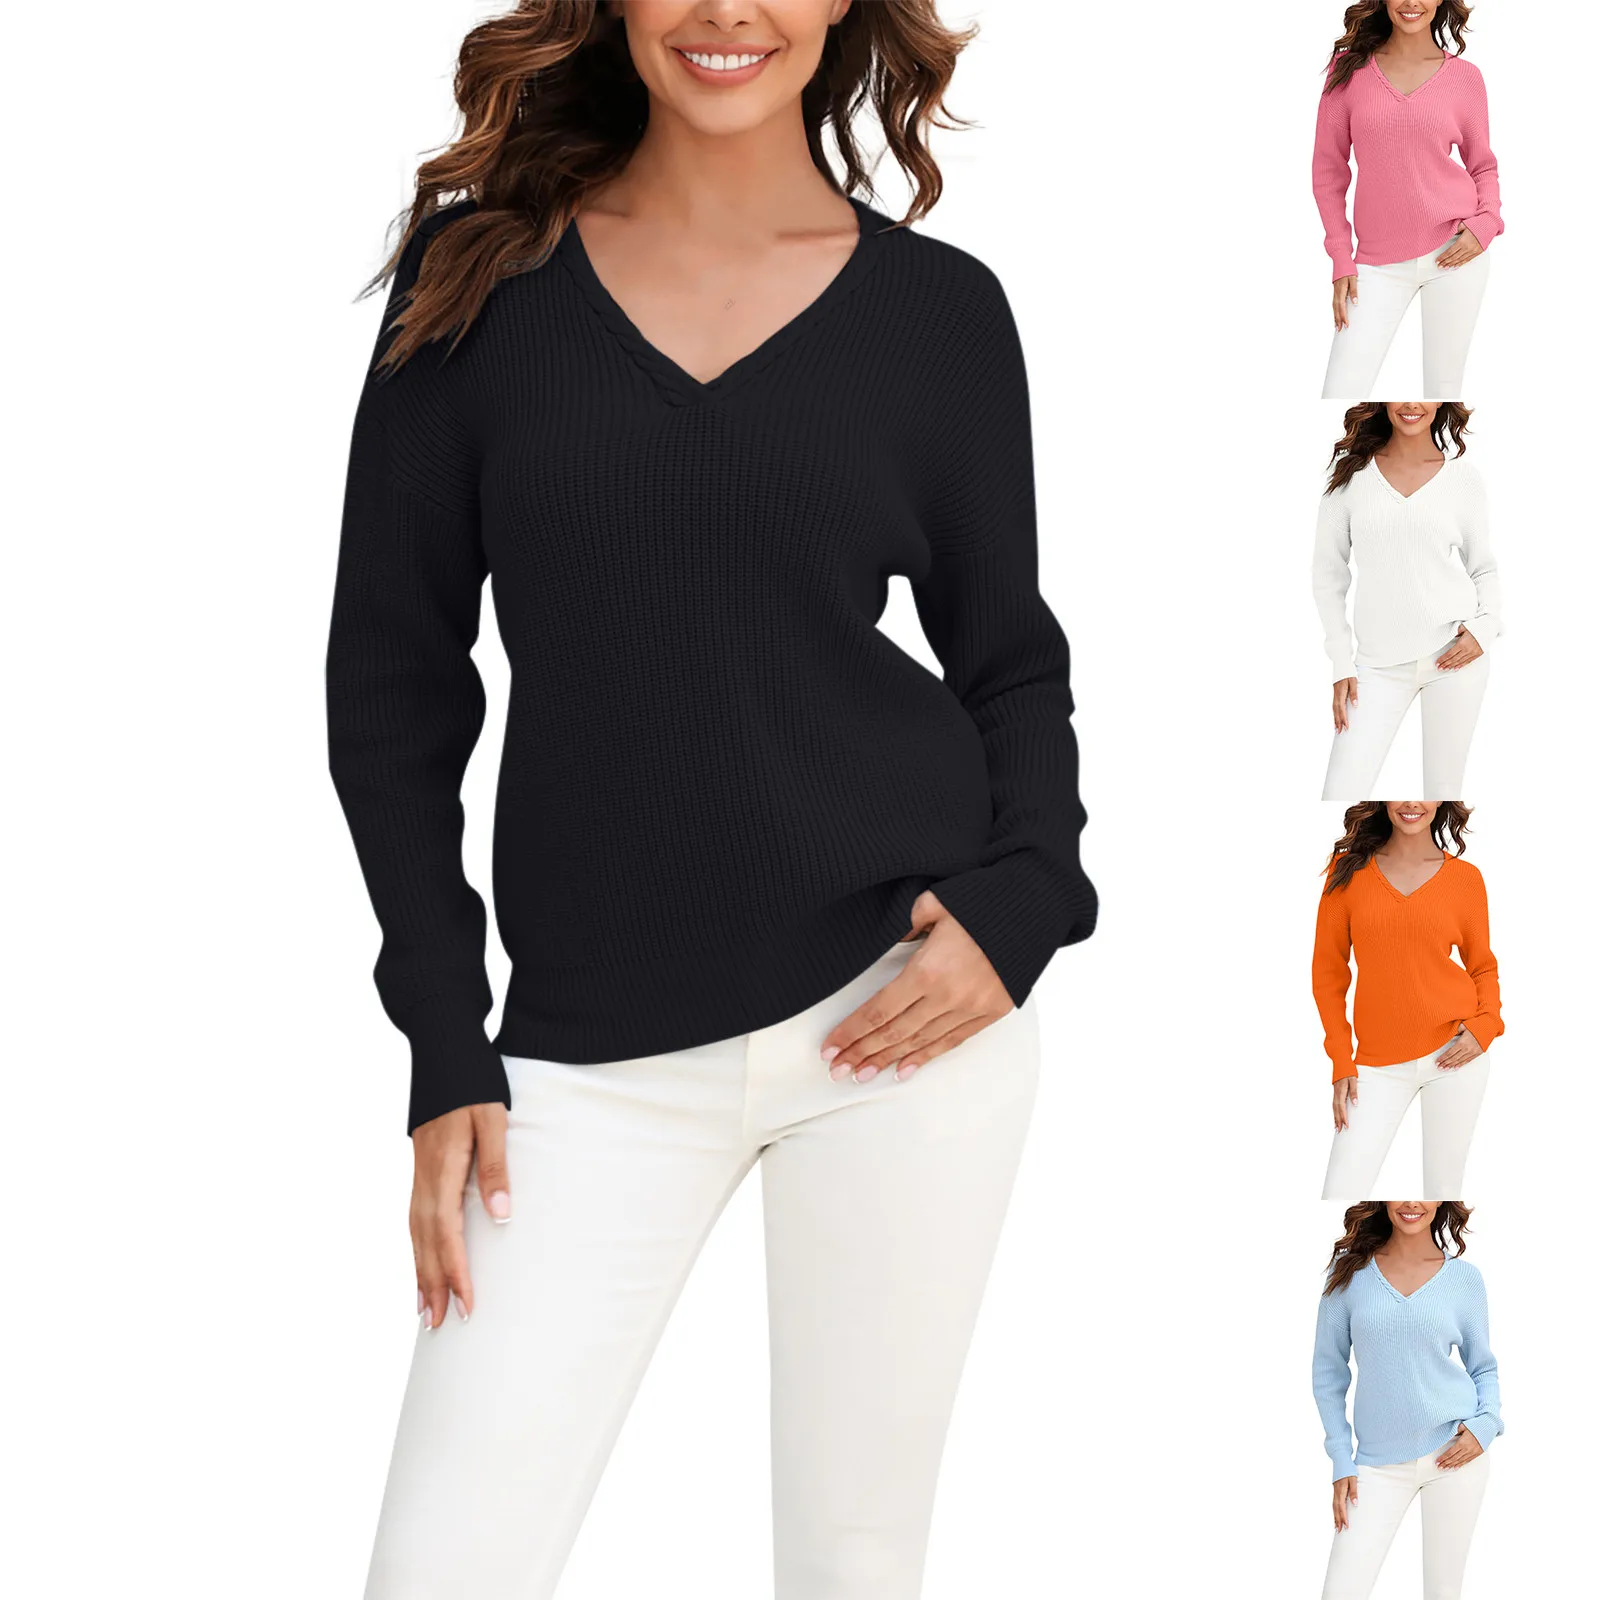 

Ladies V Neck Threaded Open Casual Long Sleeve Tunic Knitwear Elastic Waist Layered Uniquely Designed Eye-Catching And Personali